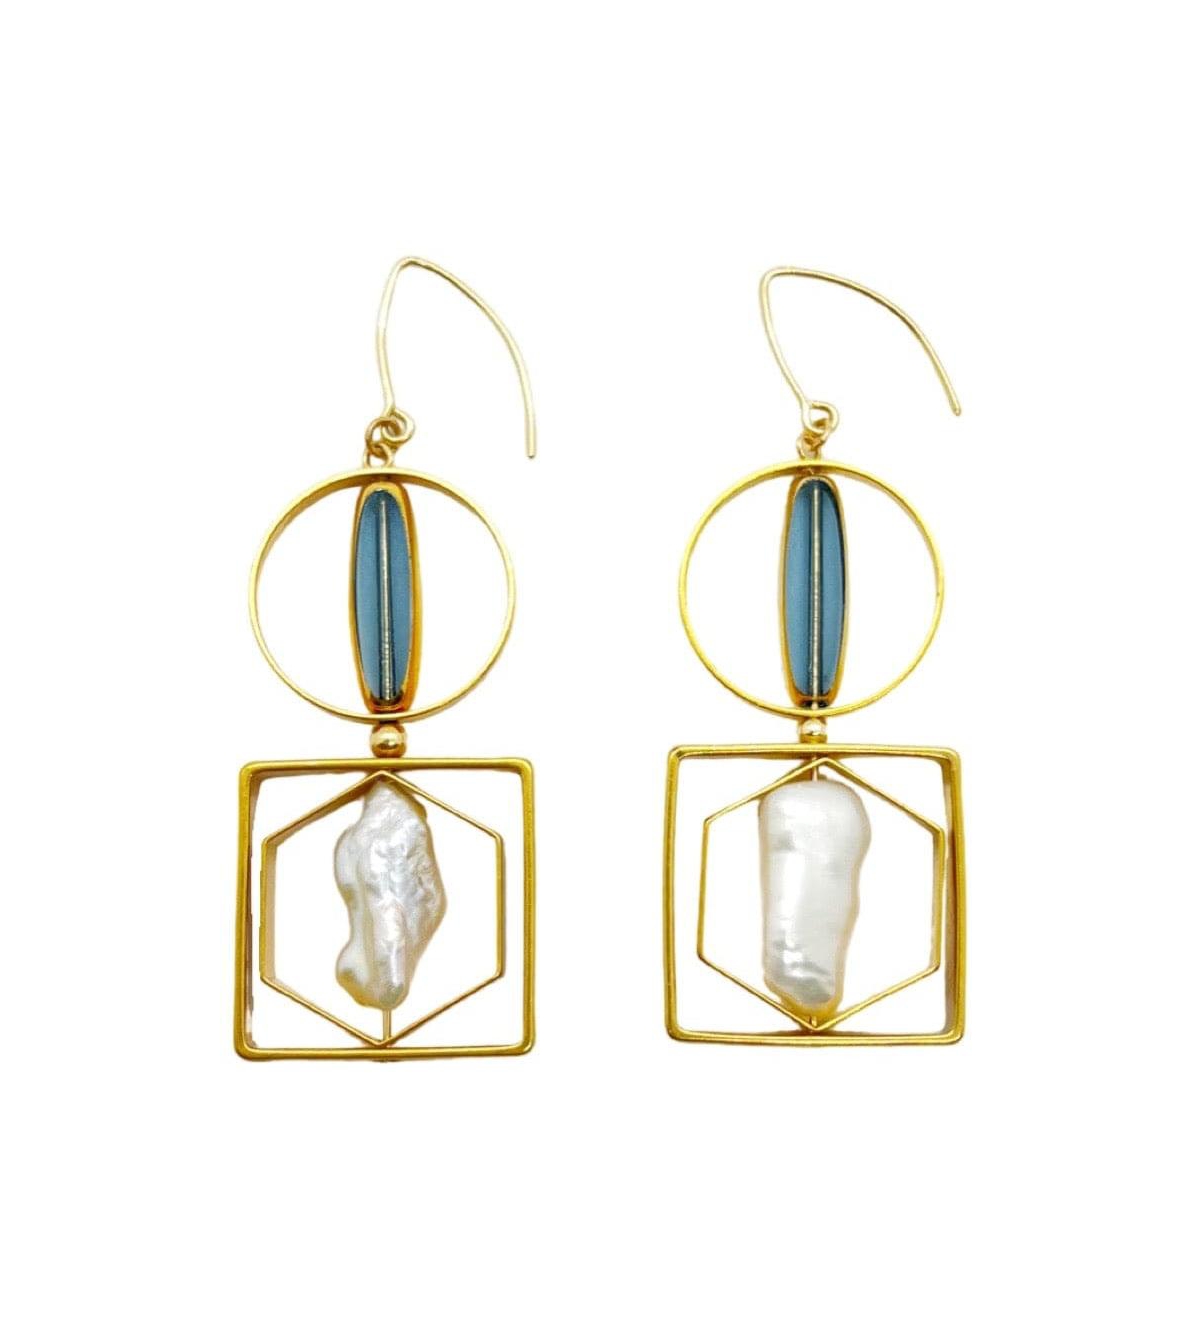 Grey Glass and Pearl Geometric Earrings - Grey, white and gold